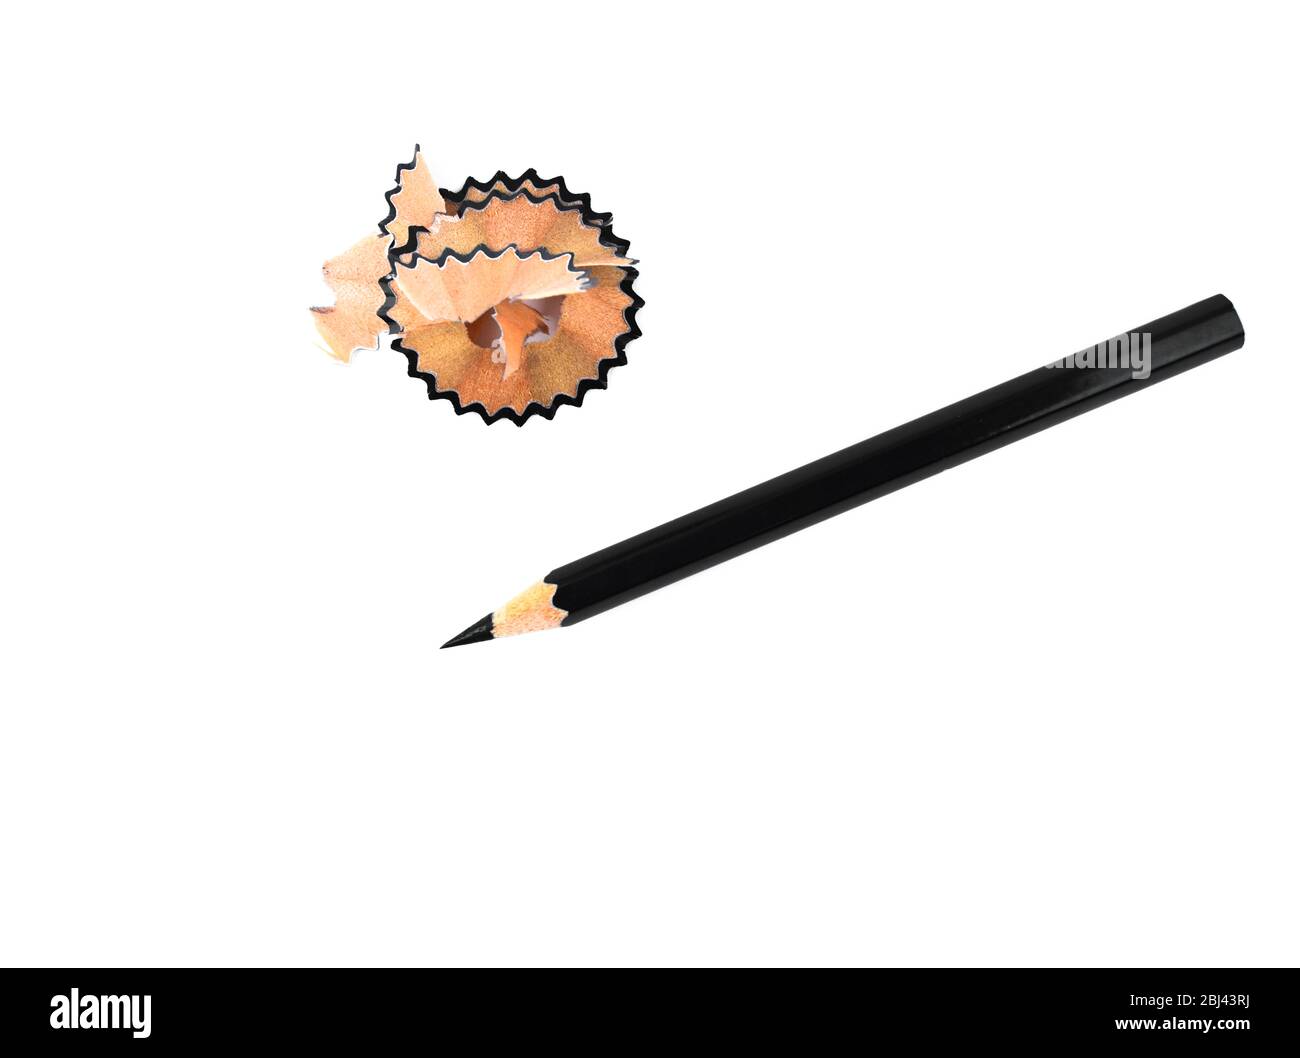 Pencil shavings placed beside a black color wood pencil crayon on a white isolated background Stock Photo